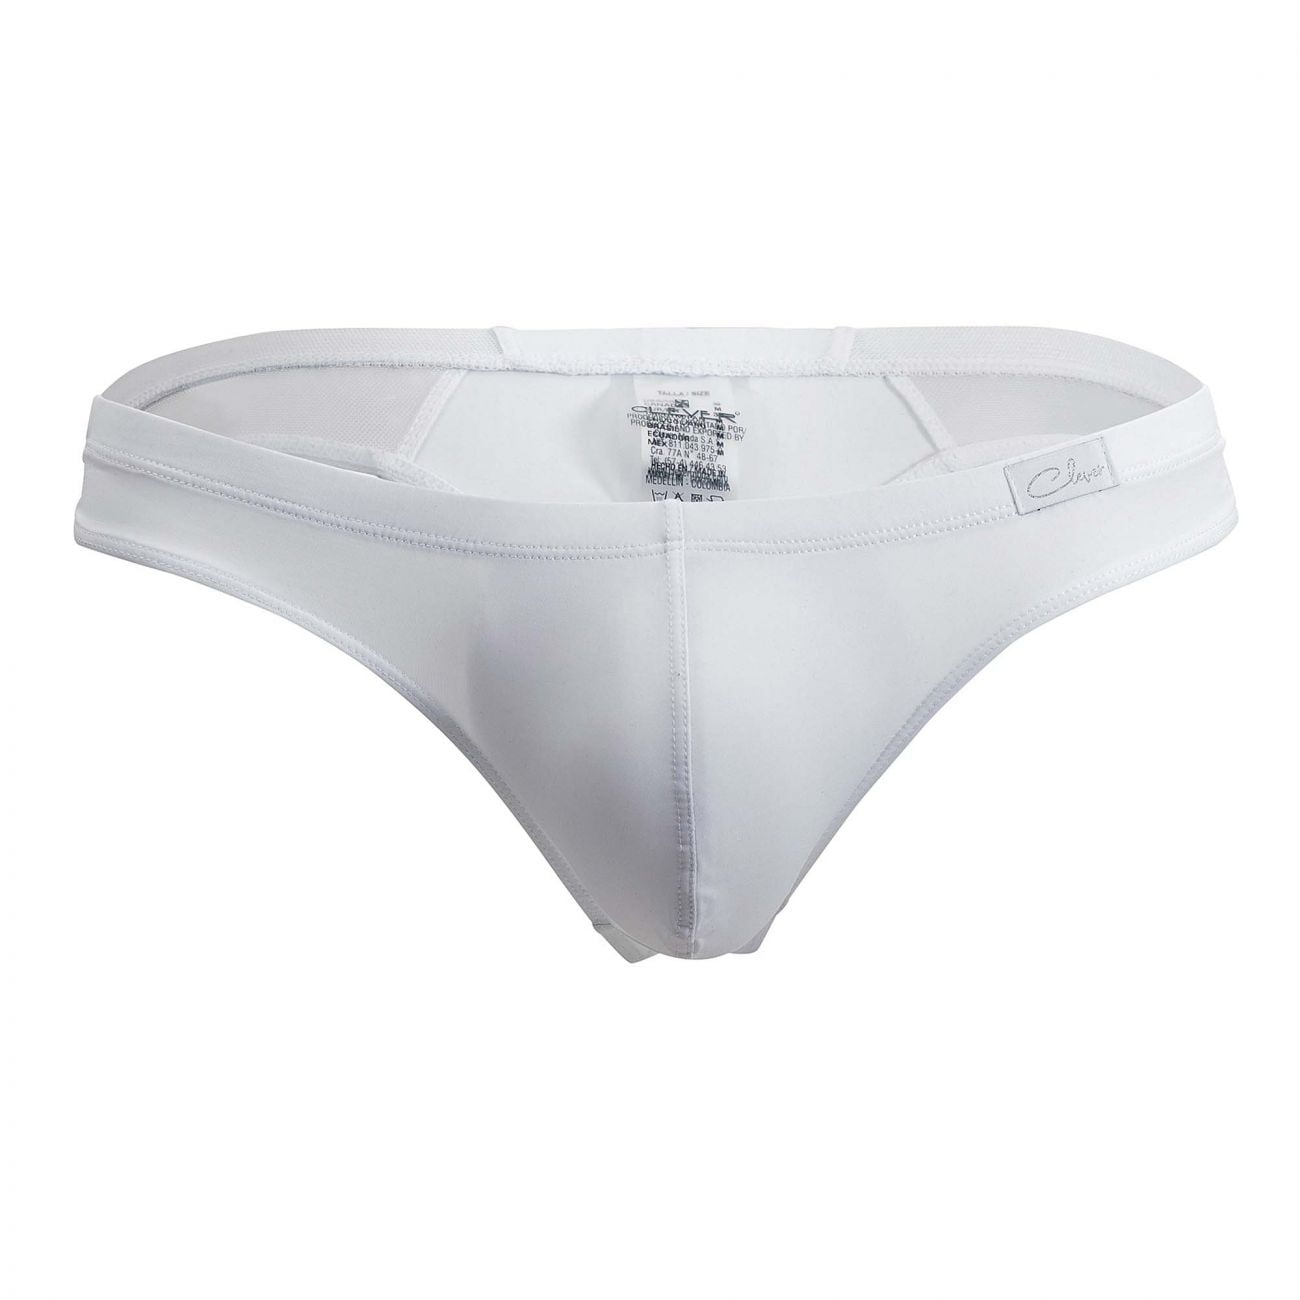 Clever 0204 Safety Thongs - Walmart.com